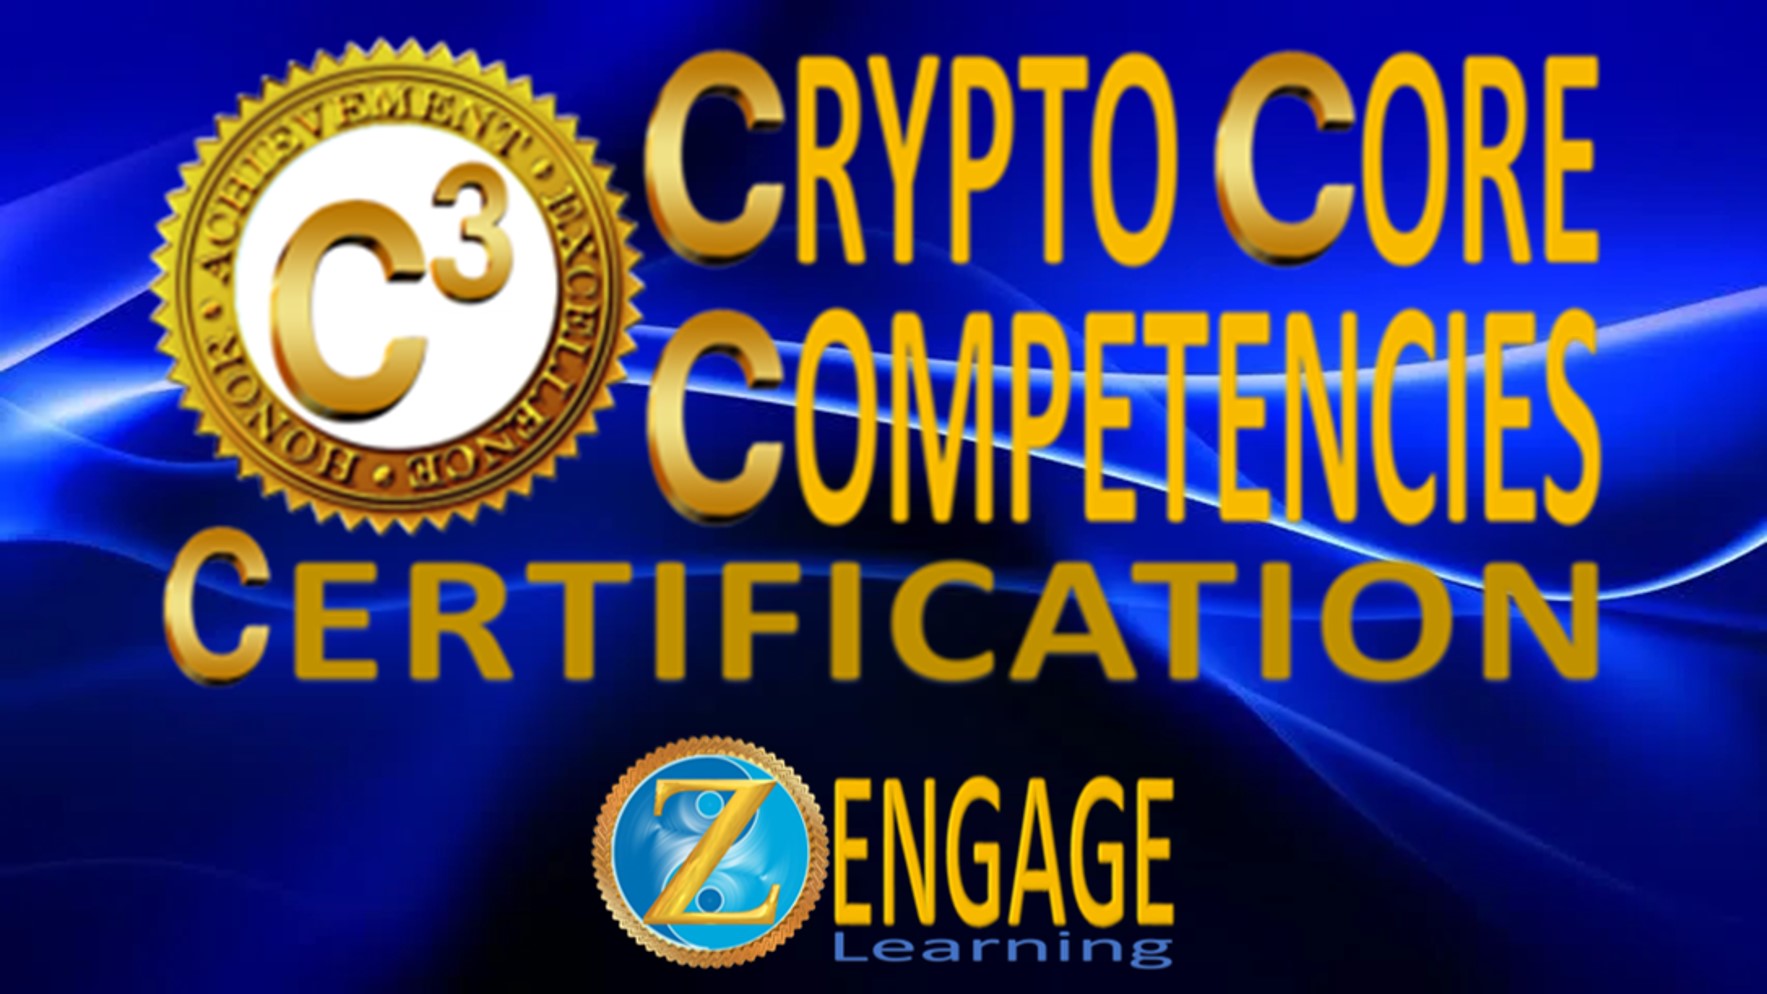 Certify C3 - Cryptocurrency Core Competencies - Personal Development and Career Advancement